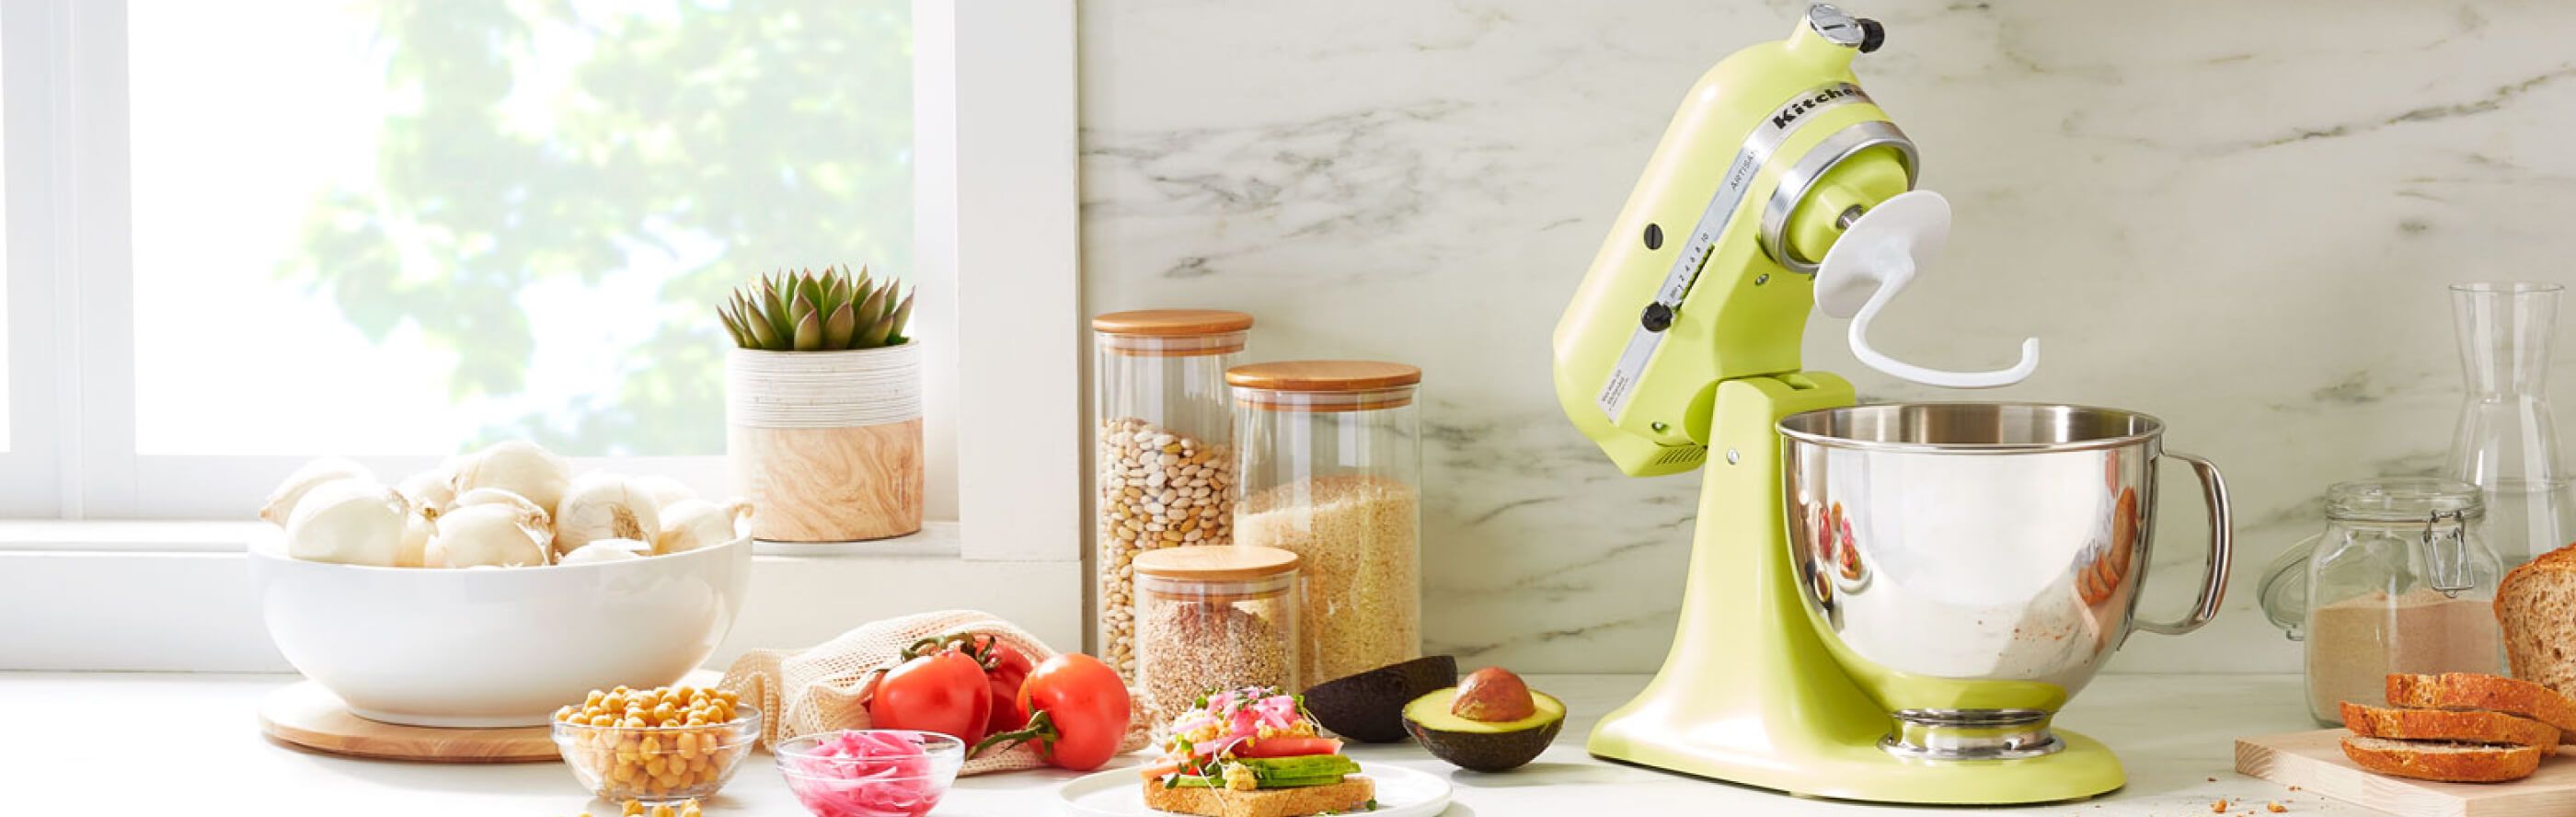 A KitchenAid® stand mixer with a dough hook accessory on a modern kitchen counter next to fresh vegetables for making a sandwich.